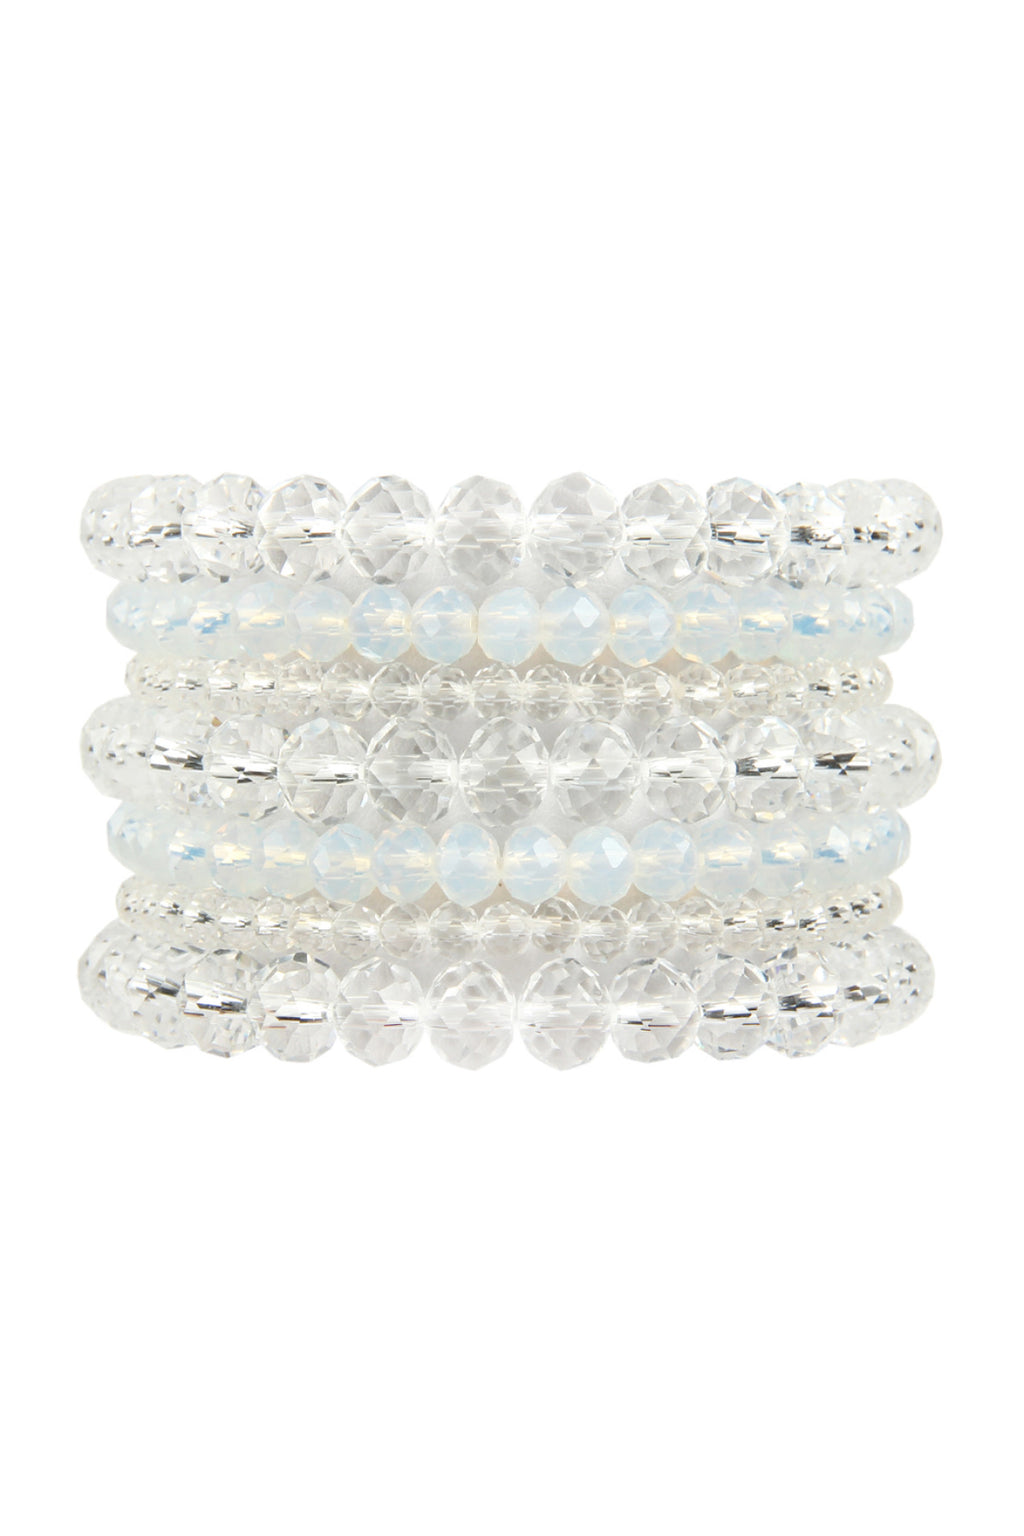 Clear Seven Lines Glass Beads Stretch Bracelet - Pack of 6